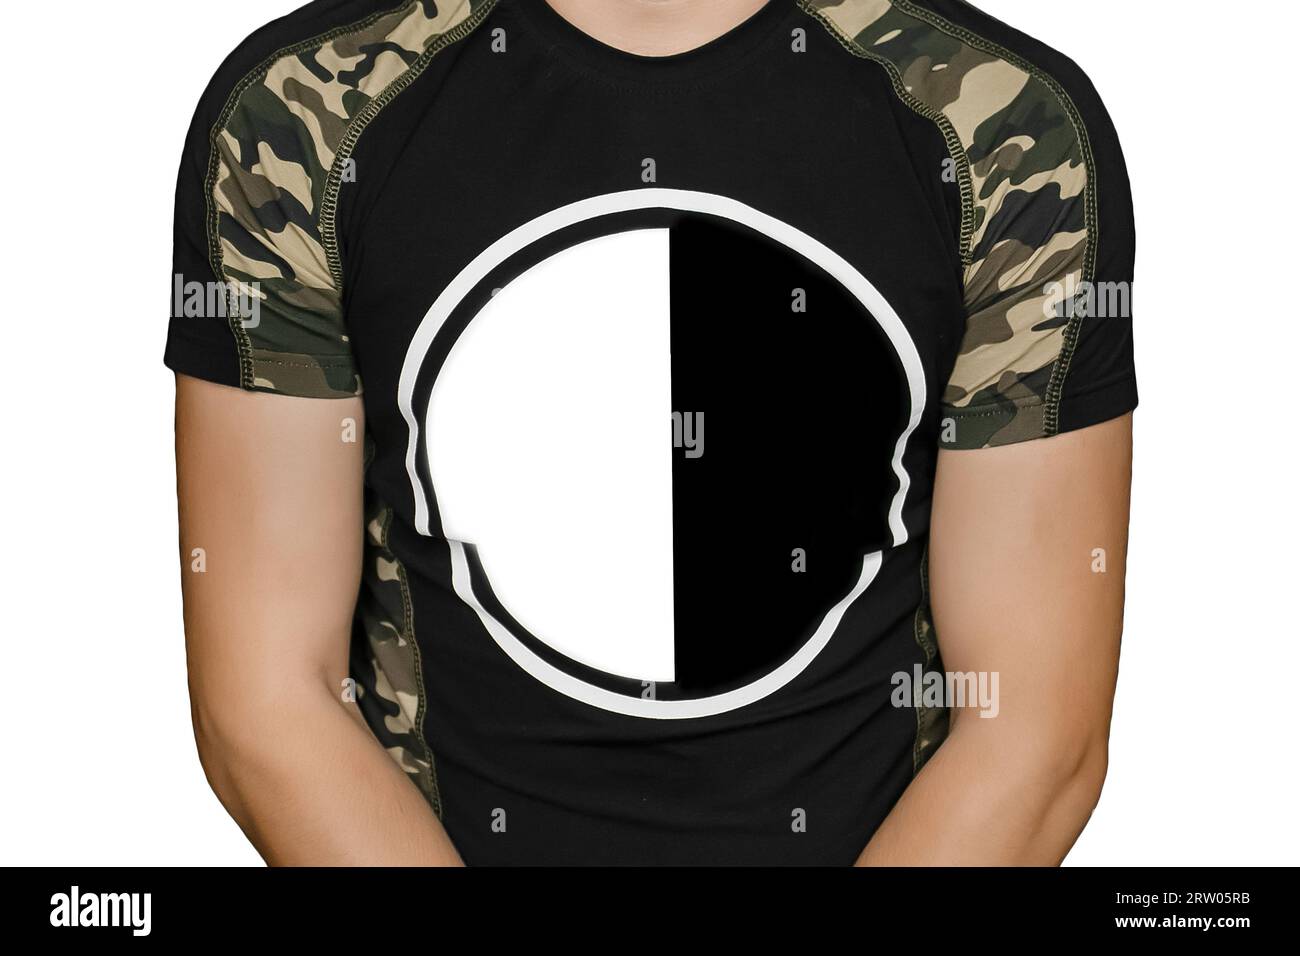 Yin and yang sign symbol black and white contrast round circle on the T-shirt for text and design blank space empty background. Stock Photo